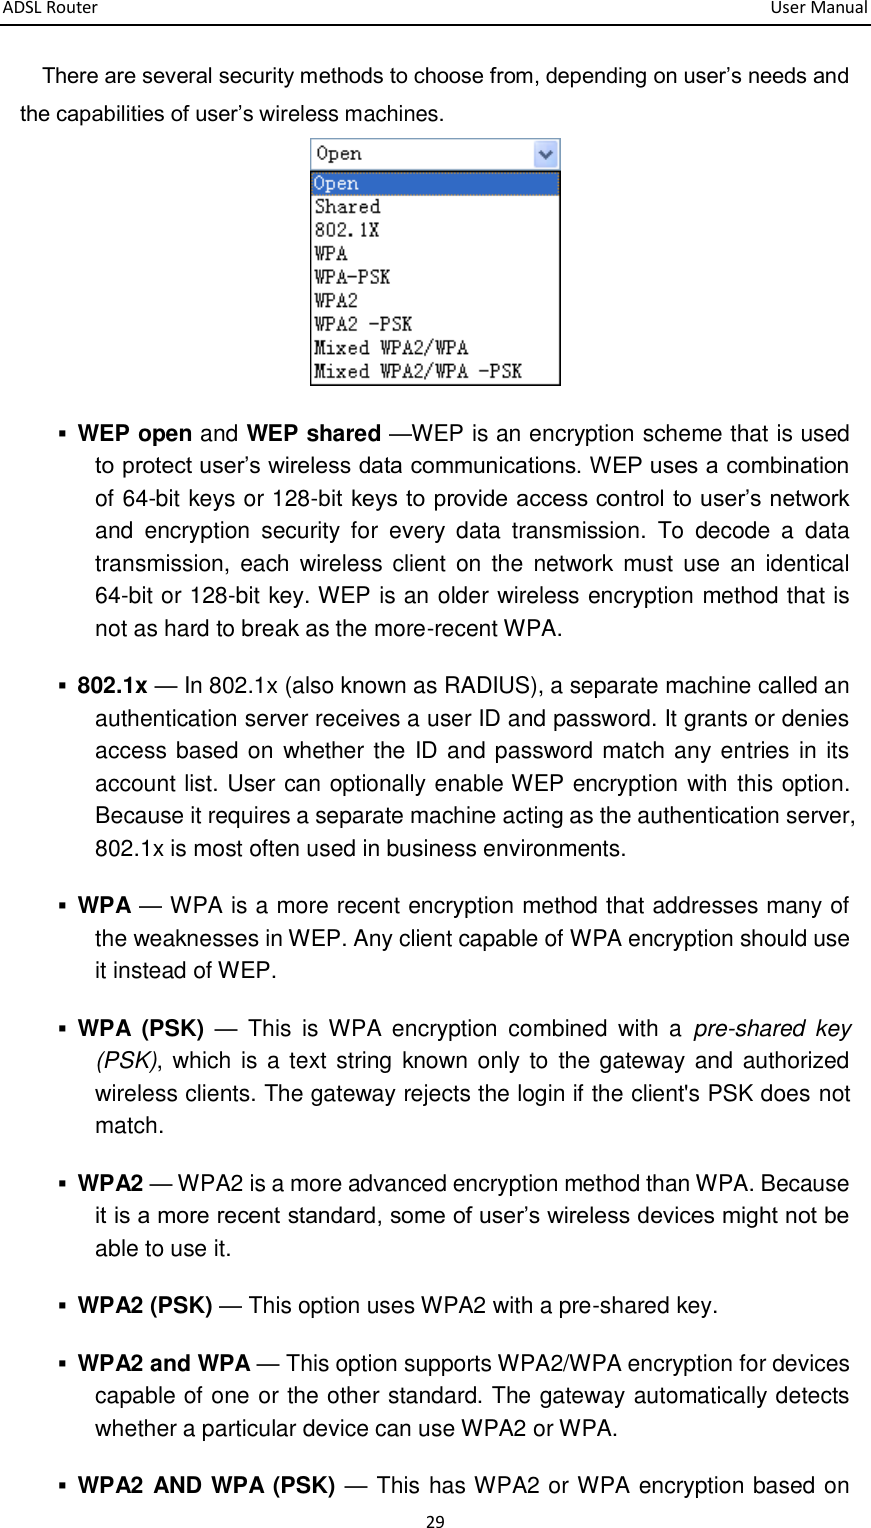 ADSL Router       User Manual 29 There are several security methods to choose from, depending on user’s needs and the capabilities of user’s wireless machines.   WEP open and WEP shared —WEP is an encryption scheme that is used to protect user’s wireless data communications. WEP uses a combination of 64-bit keys or 128-bit keys to provide access control to user’s network and  encryption  security  for  every  data  transmission.  To  decode  a  data transmission, each wireless  client  on the  network must  use an  identical 64-bit or 128-bit key. WEP is an older wireless encryption method that is not as hard to break as the more-recent WPA.    802.1x — In 802.1x (also known as RADIUS), a separate machine called an authentication server receives a user ID and password. It grants or denies access based on whether the ID and password match any entries in its account list. User can optionally enable WEP encryption with this option. Because it requires a separate machine acting as the authentication server, 802.1x is most often used in business environments.    WPA — WPA is a more recent encryption method that addresses many of the weaknesses in WEP. Any client capable of WPA encryption should use it instead of WEP.    WPA  (PSK) —  This  is  WPA  encryption  combined  with  a  pre-shared  key (PSK),  which  is a text  string  known only  to  the gateway and  authorized wireless clients. The gateway rejects the login if the client&apos;s PSK does not match.    WPA2 — WPA2 is a more advanced encryption method than WPA. Because it is a more recent standard, some of user’s wireless devices might not be able to use it.    WPA2 (PSK) — This option uses WPA2 with a pre-shared key.    WPA2 and WPA — This option supports WPA2/WPA encryption for devices capable of one or the other standard. The gateway automatically detects whether a particular device can use WPA2 or WPA.    WPA2 AND WPA (PSK) — This has WPA2 or WPA encryption based on 